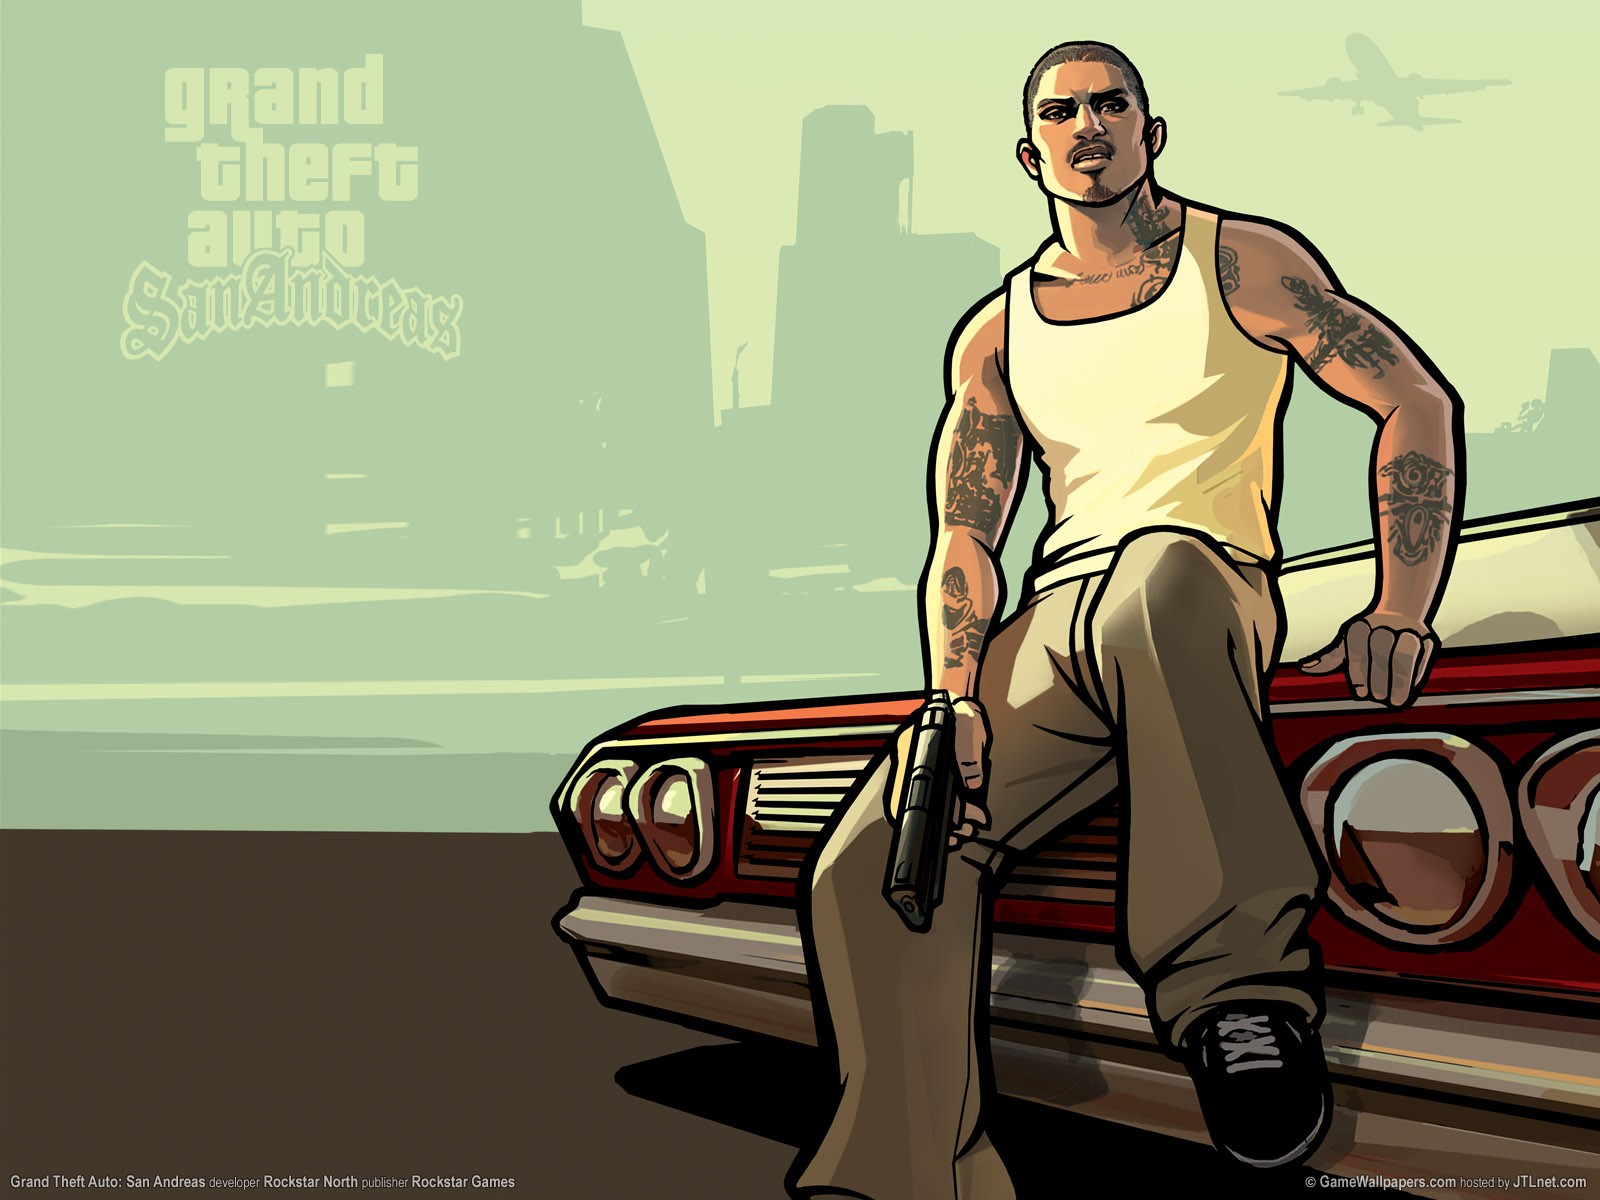 Grand Theft Auto: San Andreas coming to iOS, Android and Windows Phone in December